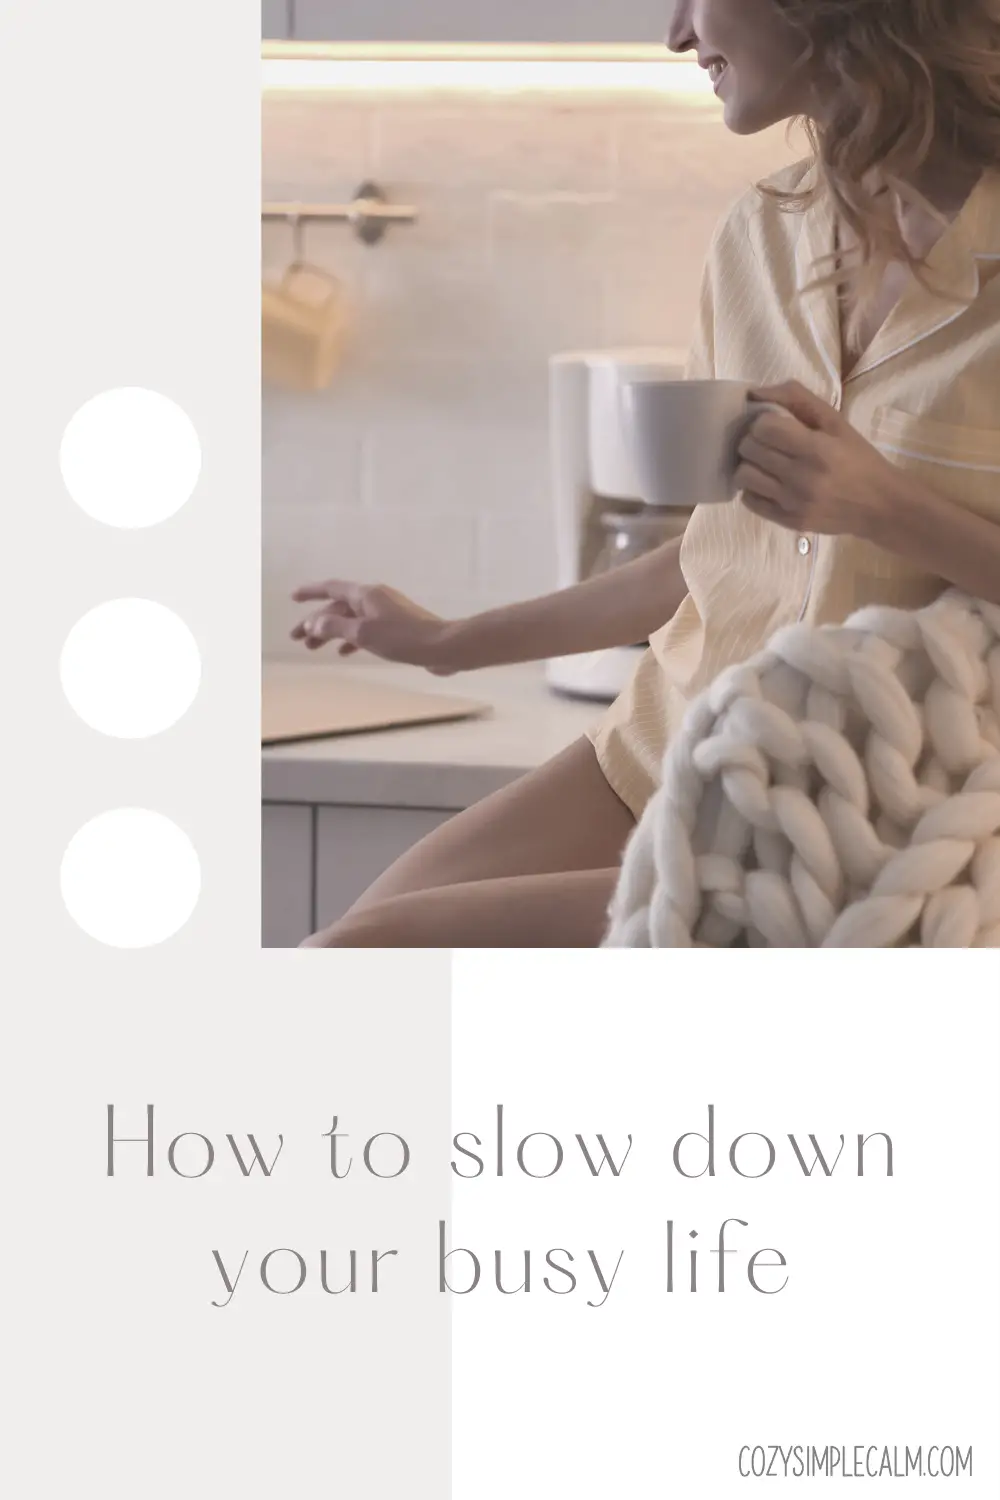 Image of woman drinking coffee in pajamas.  Text overlay: How to slow down your busy life